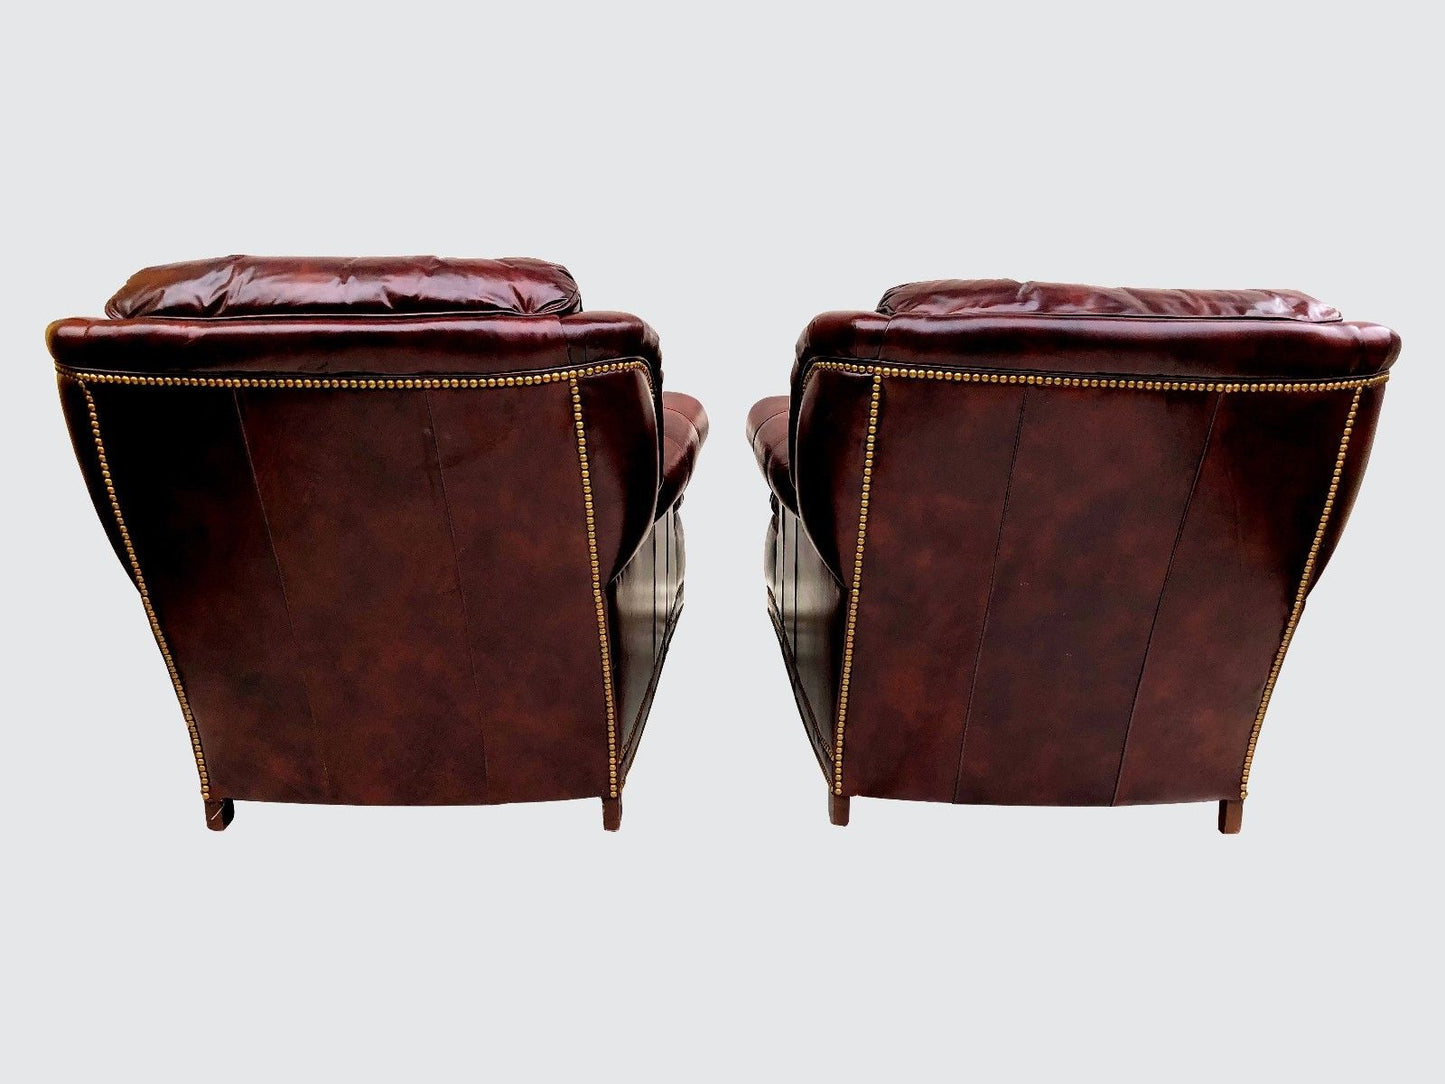 PAIR HANCOCK & MOORE WINE COLORED LEATHER CHESTERFIELD CLUB CHAIRS